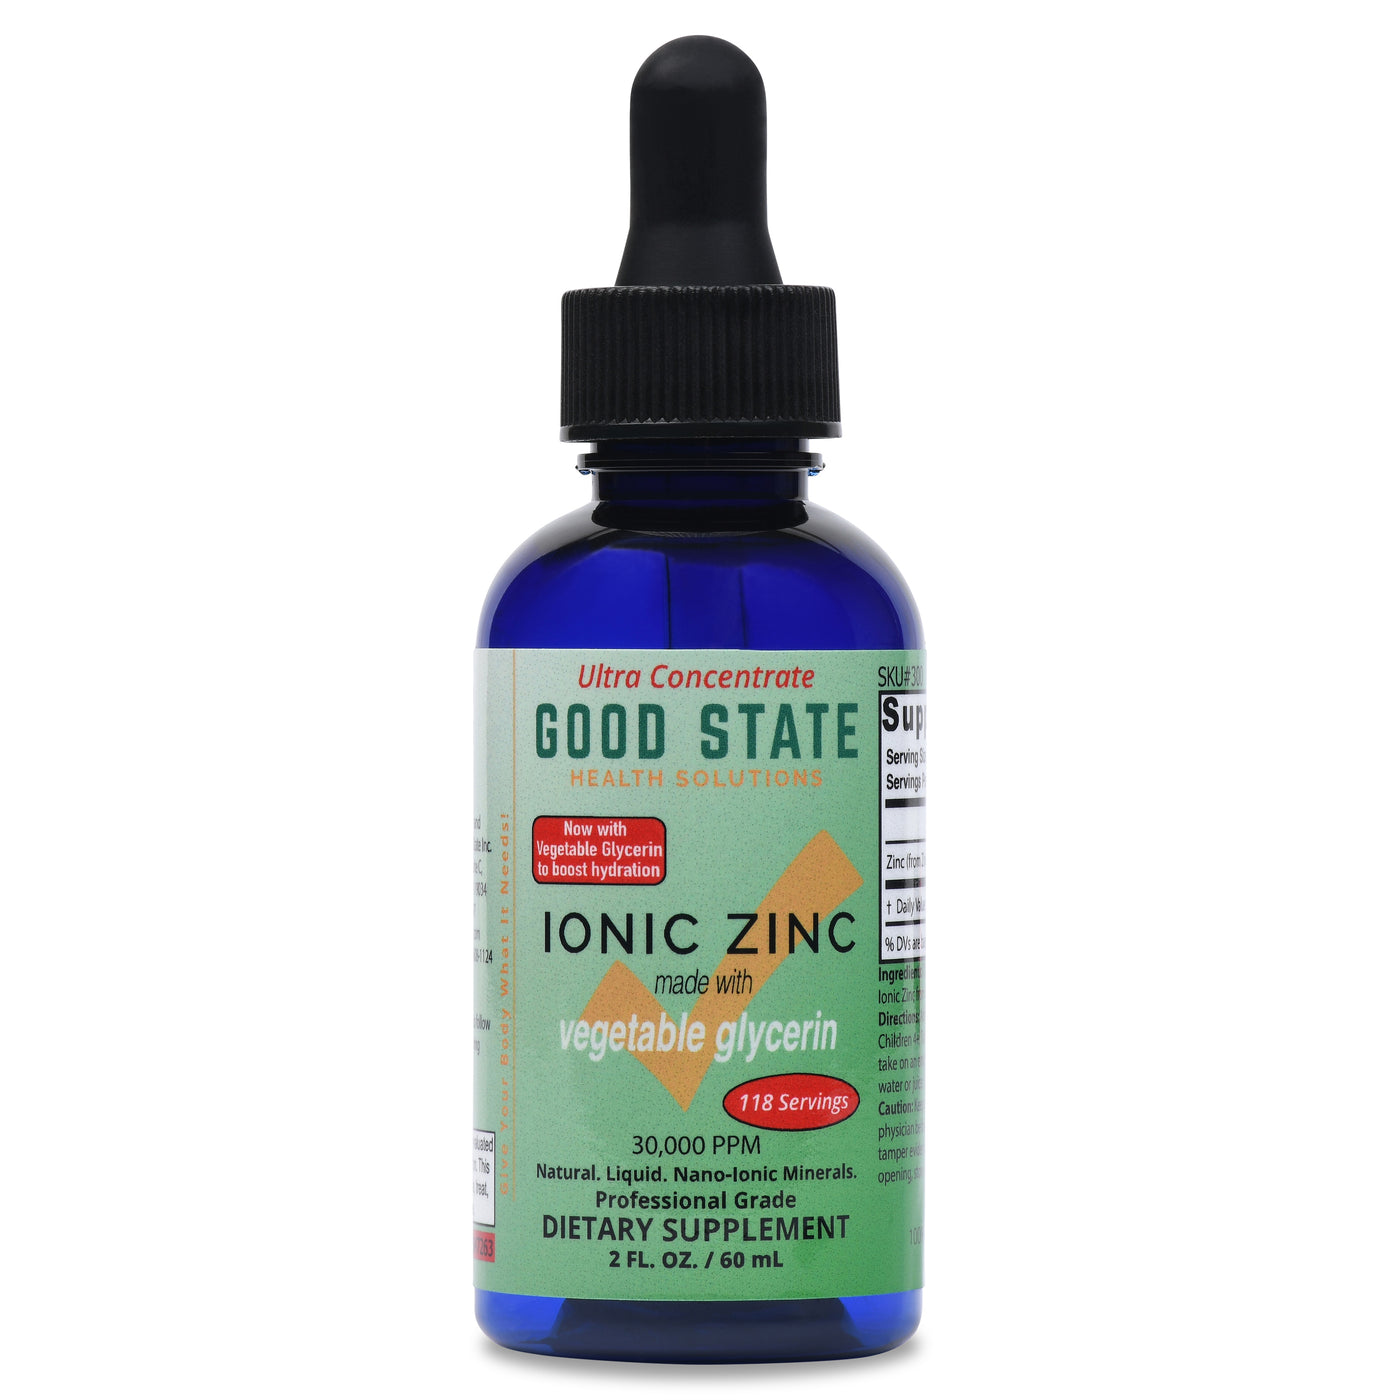 Ultra Concentrate Liquid Ionic Zinc Supplement | PET Bottle | Made with Glycerin / VG